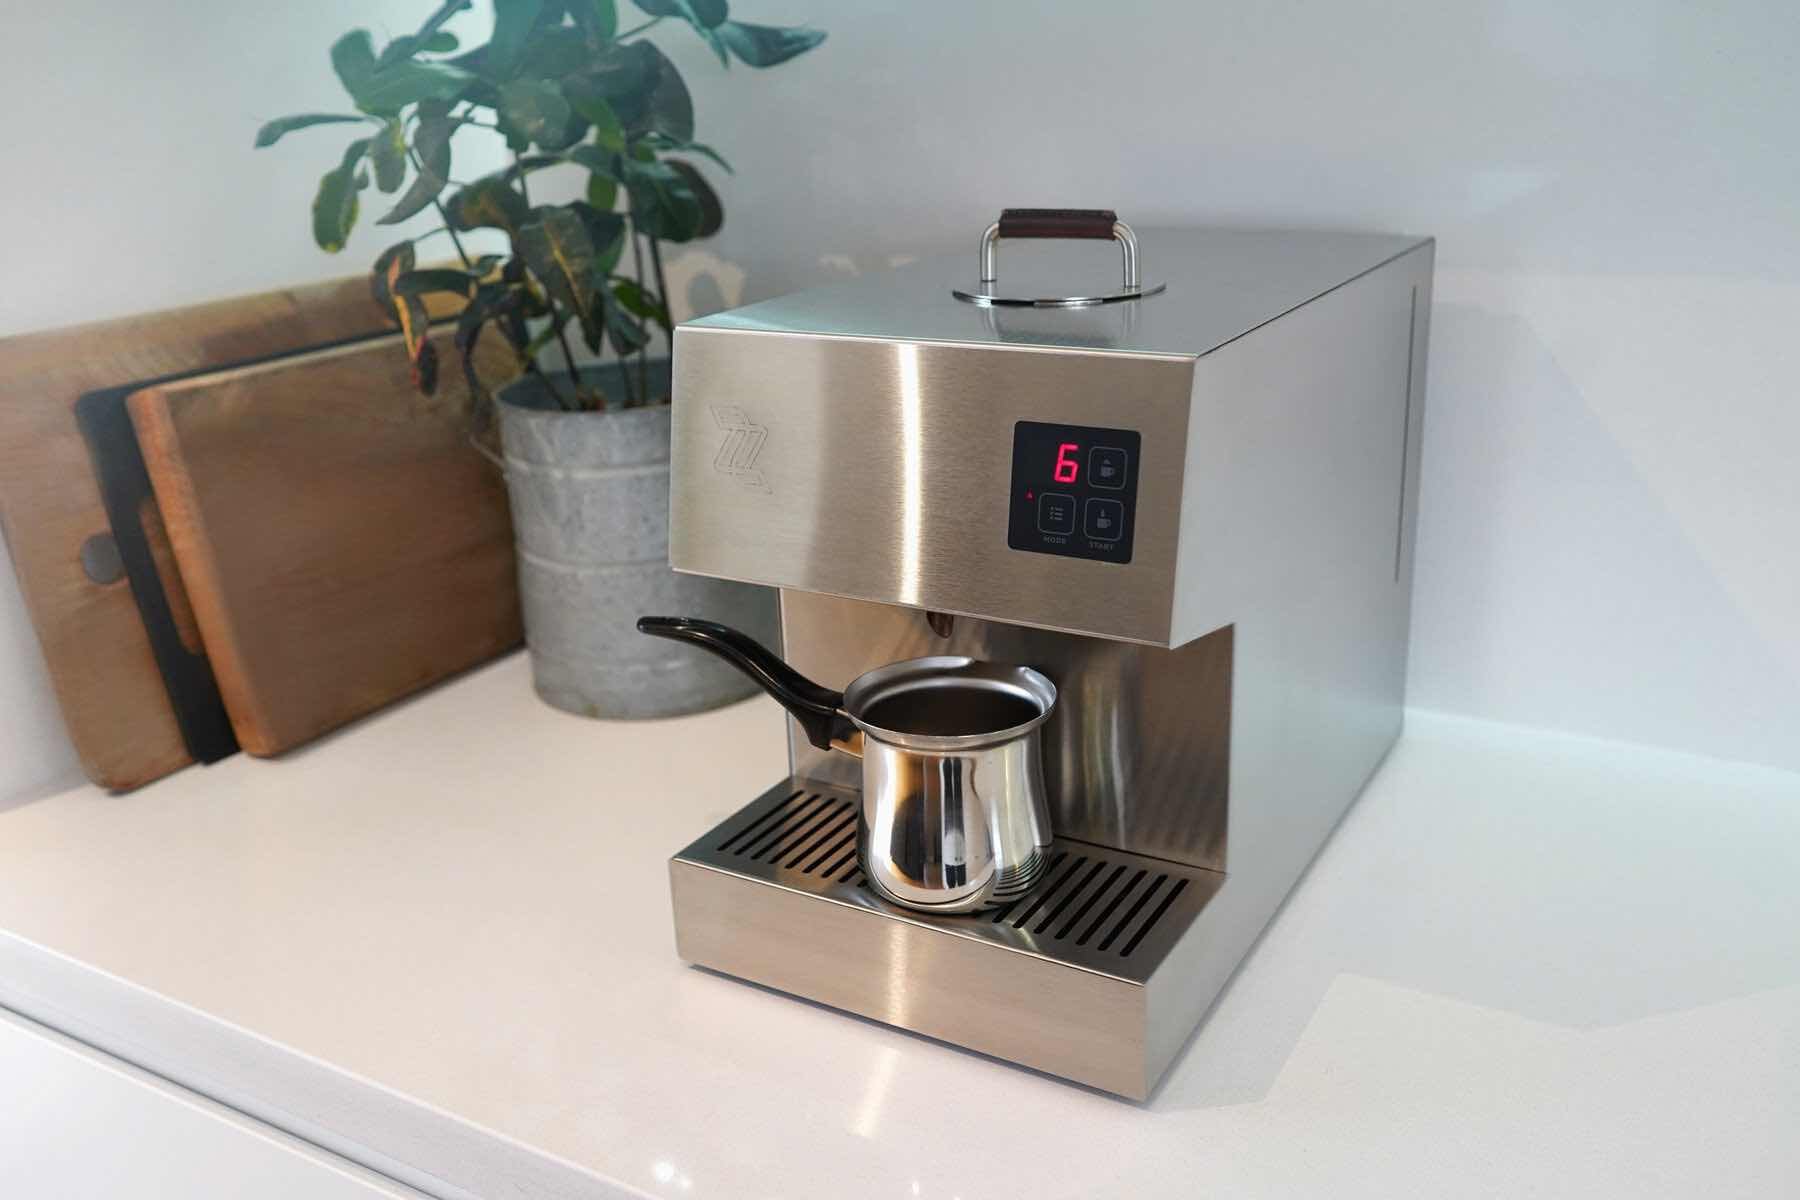  Easy to use, self-cleaning, and rich coffee every time - people will love their automatic Zou Zou Coffee machine. 